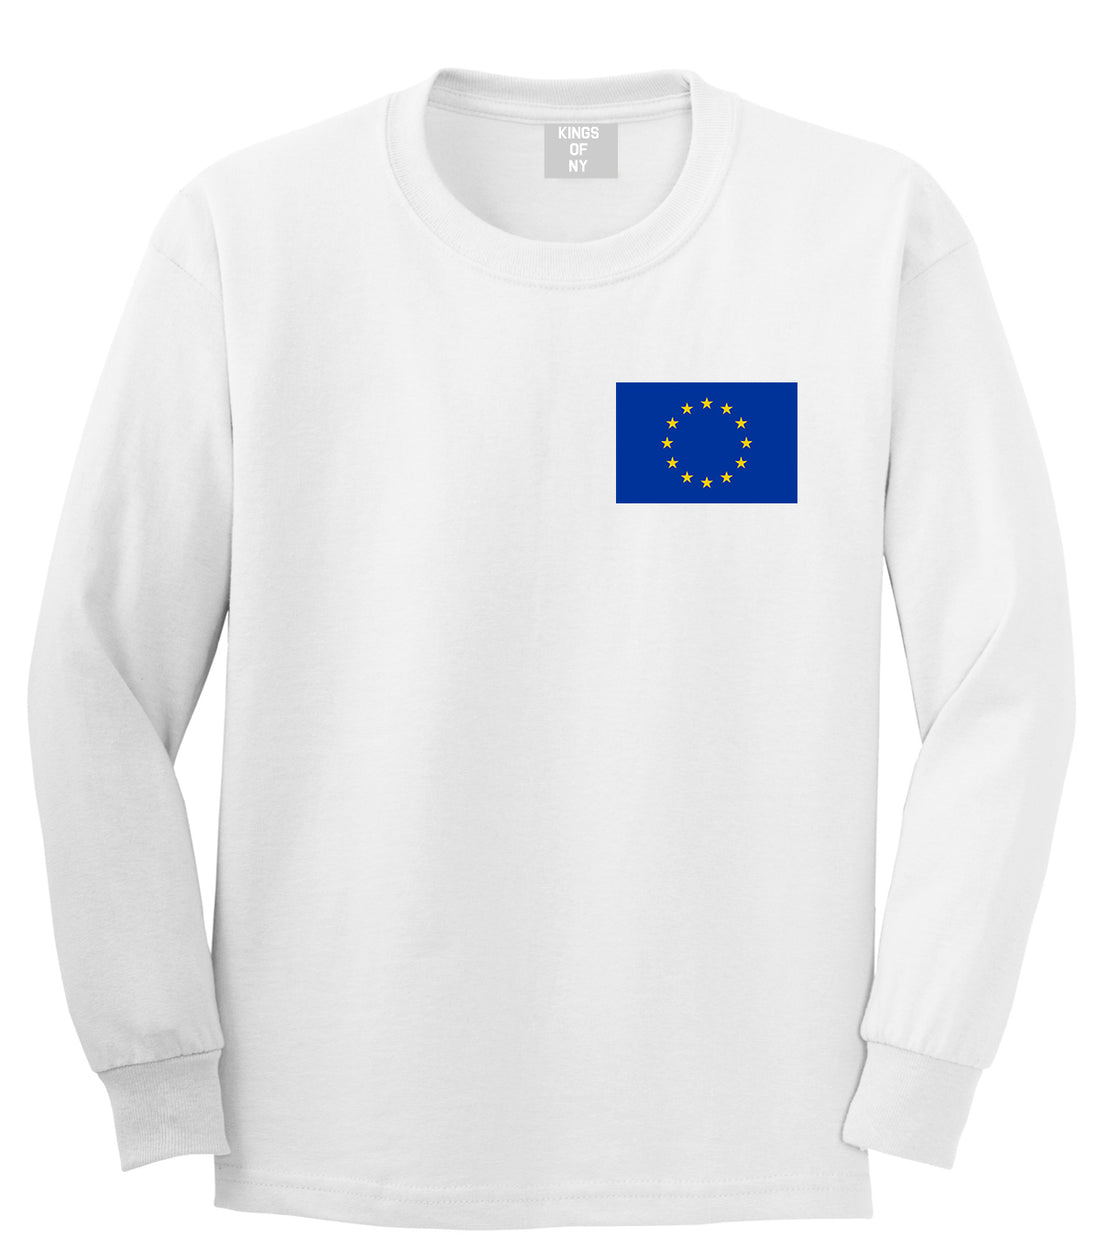 European Union Flag Chest Mens White Long Sleeve T-Shirt by KINGS OF NY